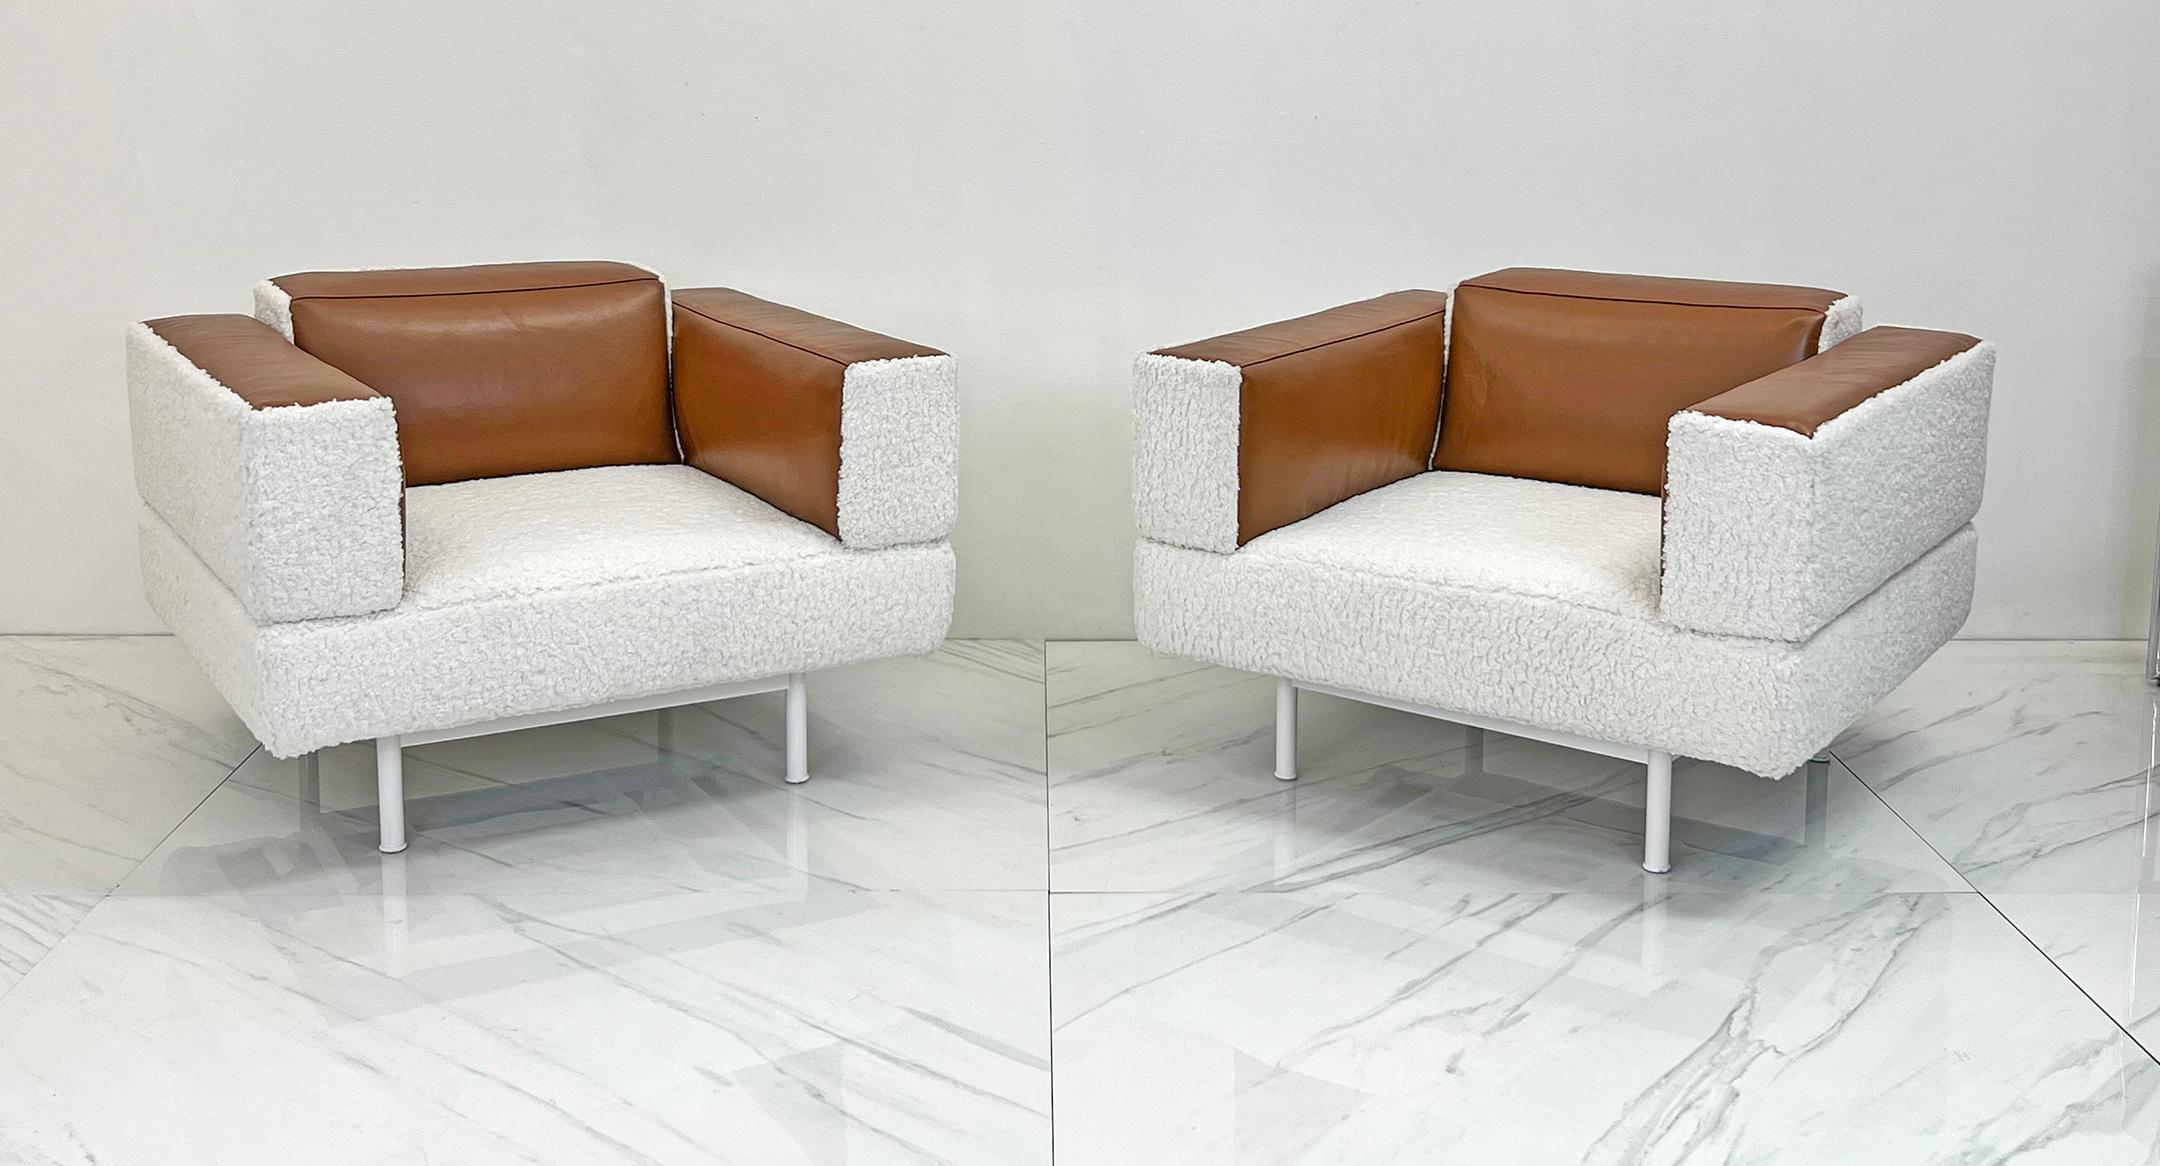 Steel Piero Lissoni Reef Chairs in Cognac Leather and Boucle, Cassina, 2001  For Sale